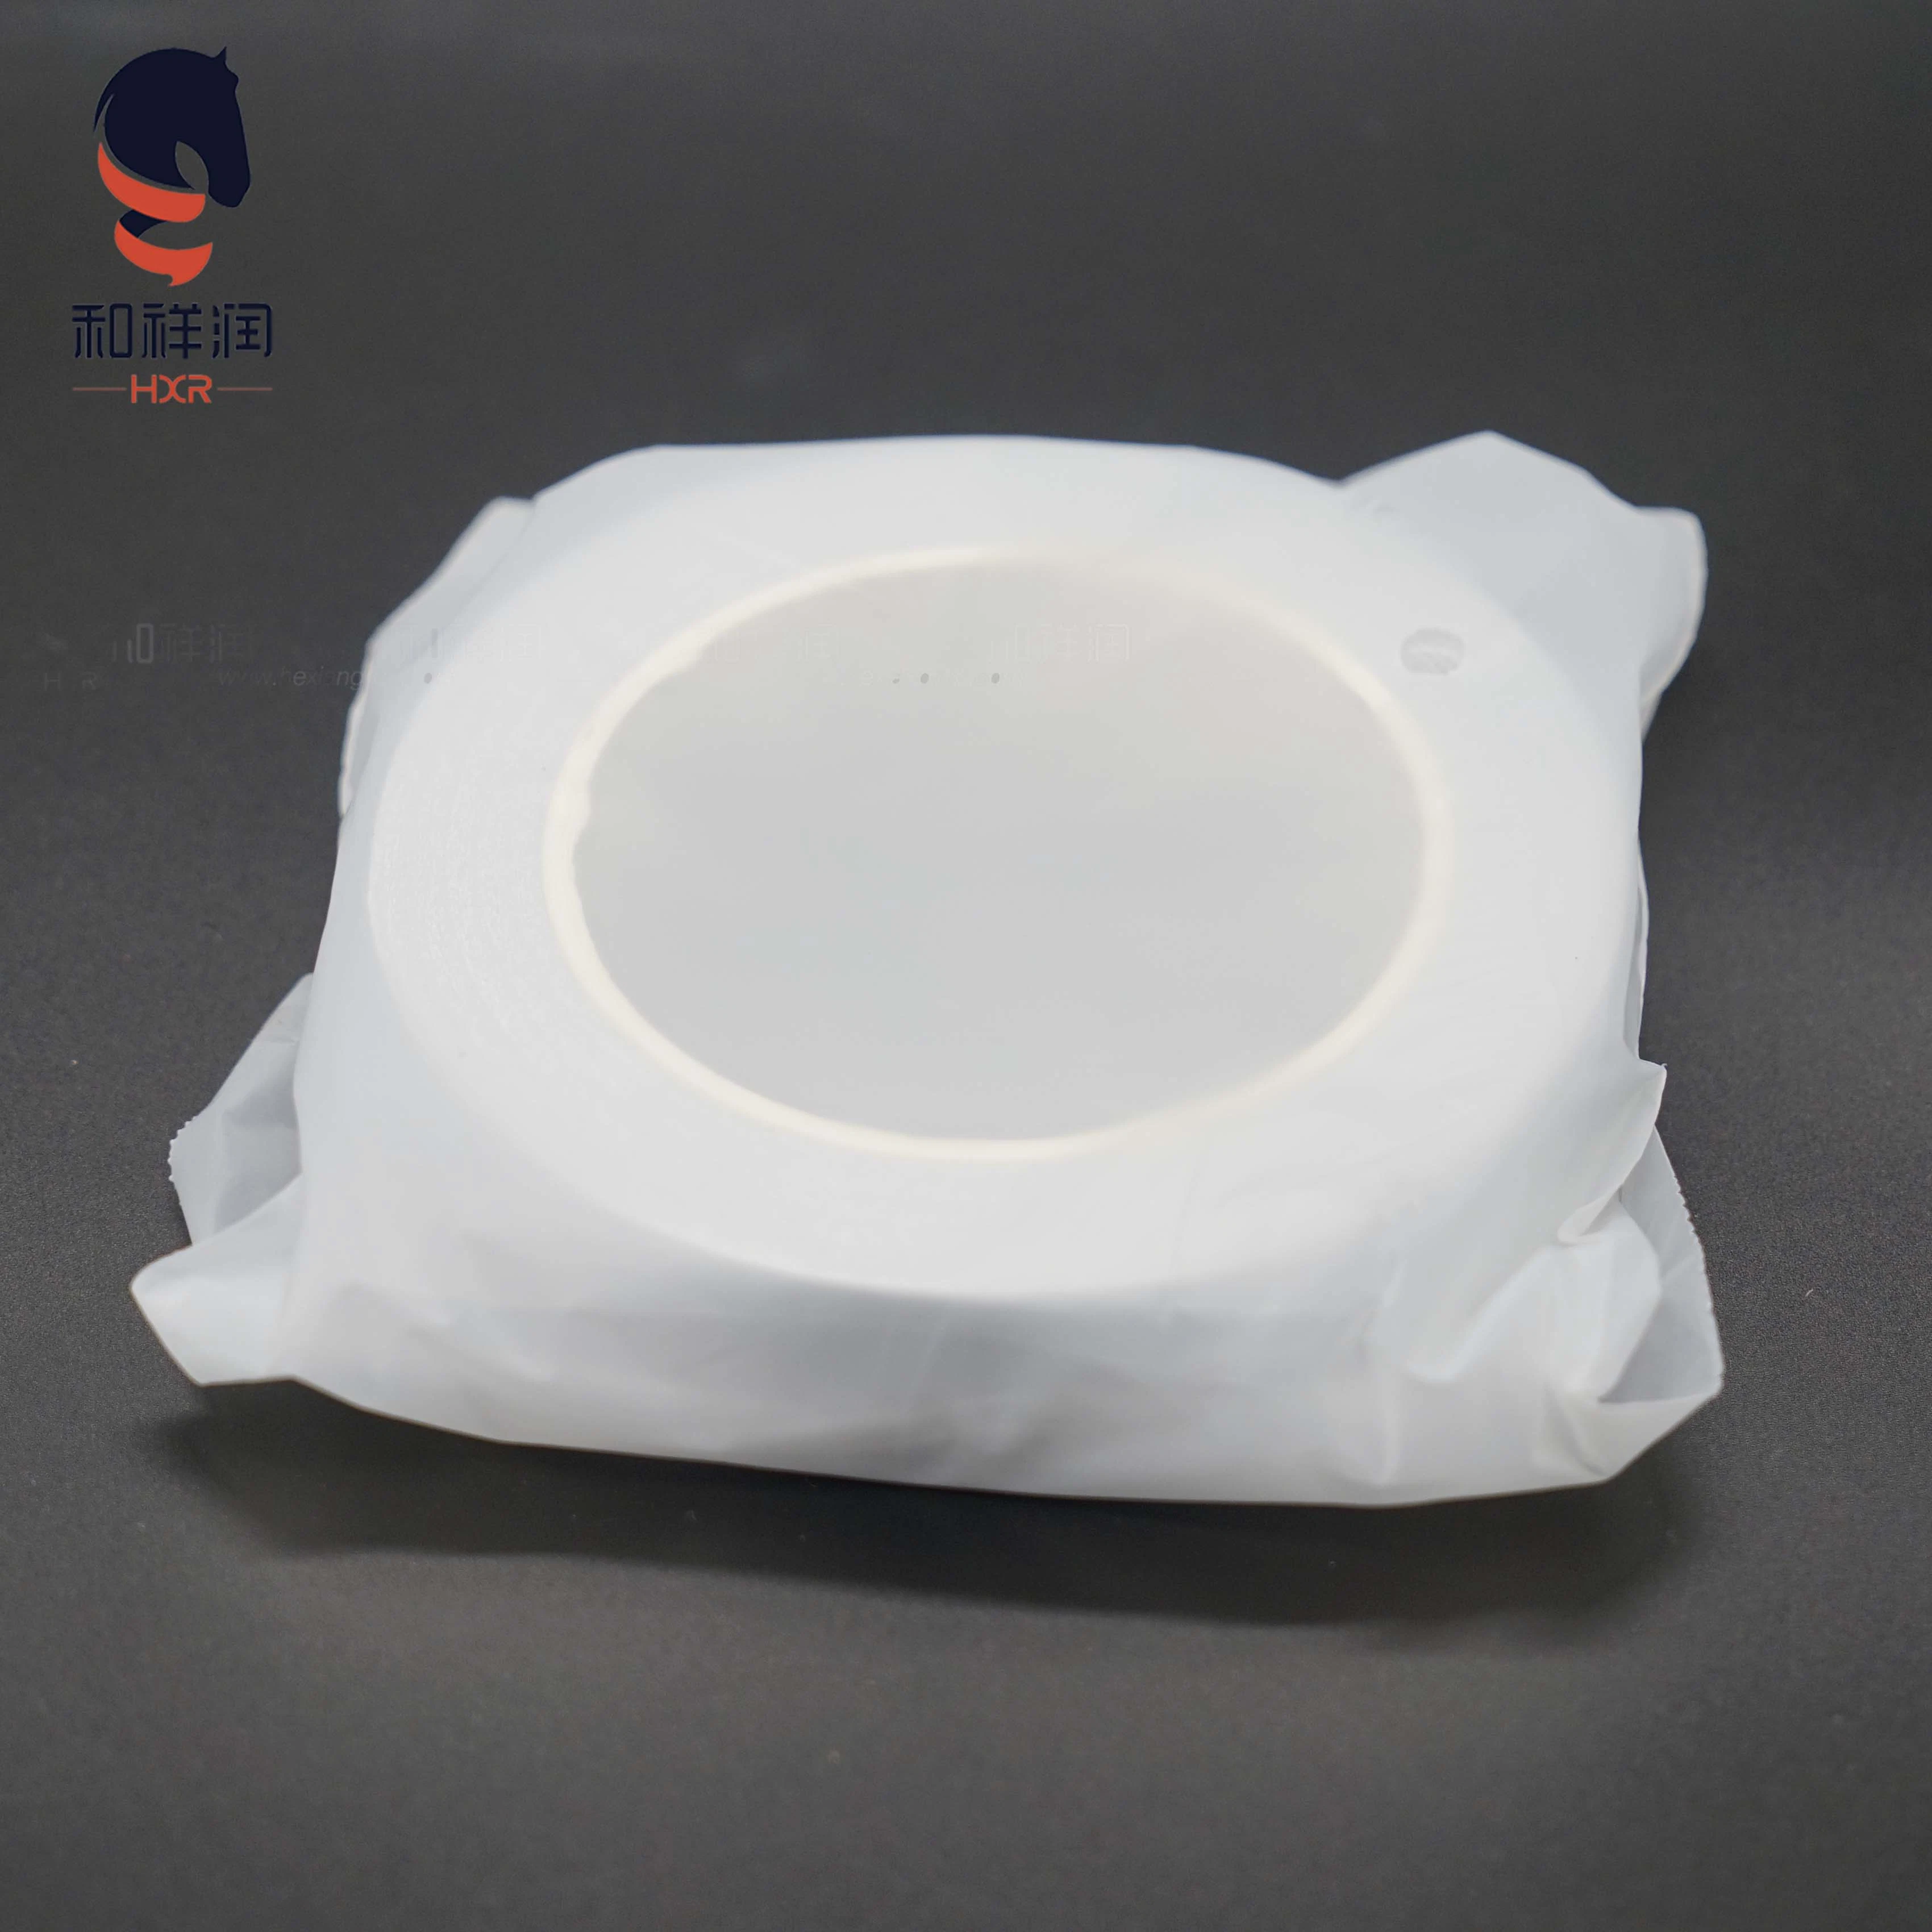 Double Sided Tissue Tape with Solvent Acrylic Adhesive